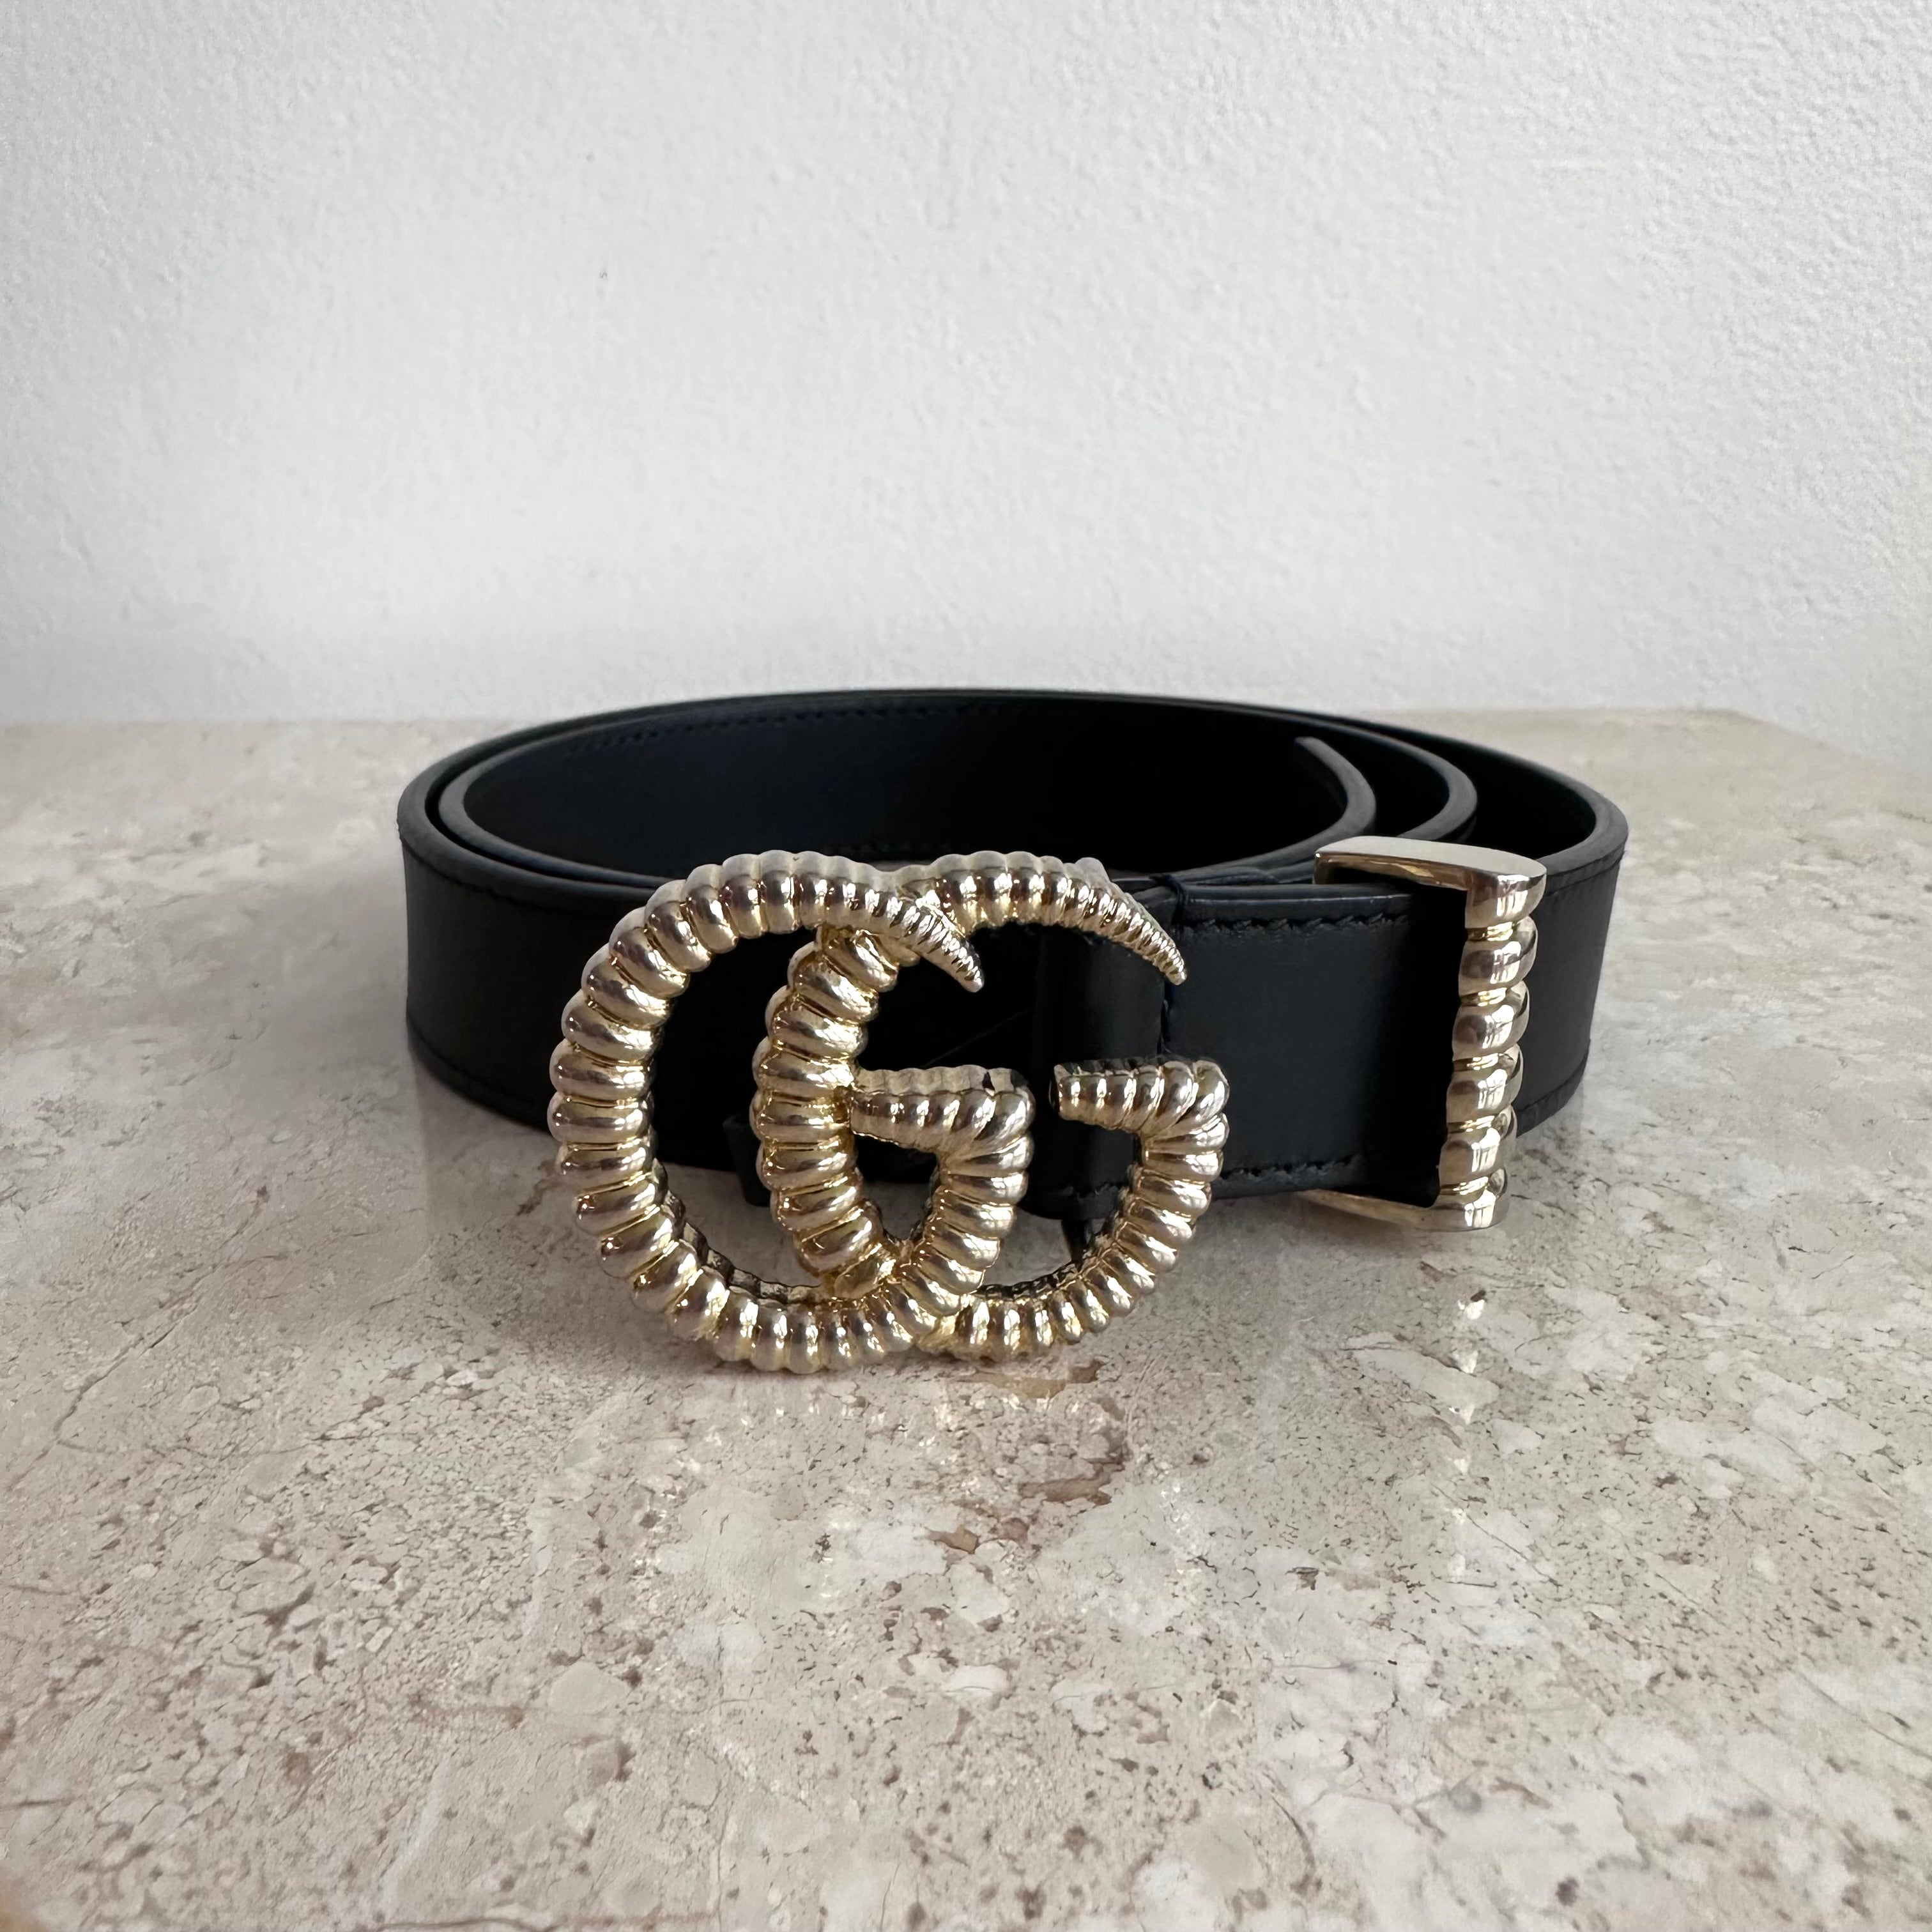 Pre-owned GUCCI Torchon Gold-Tone Belt Size 75/30